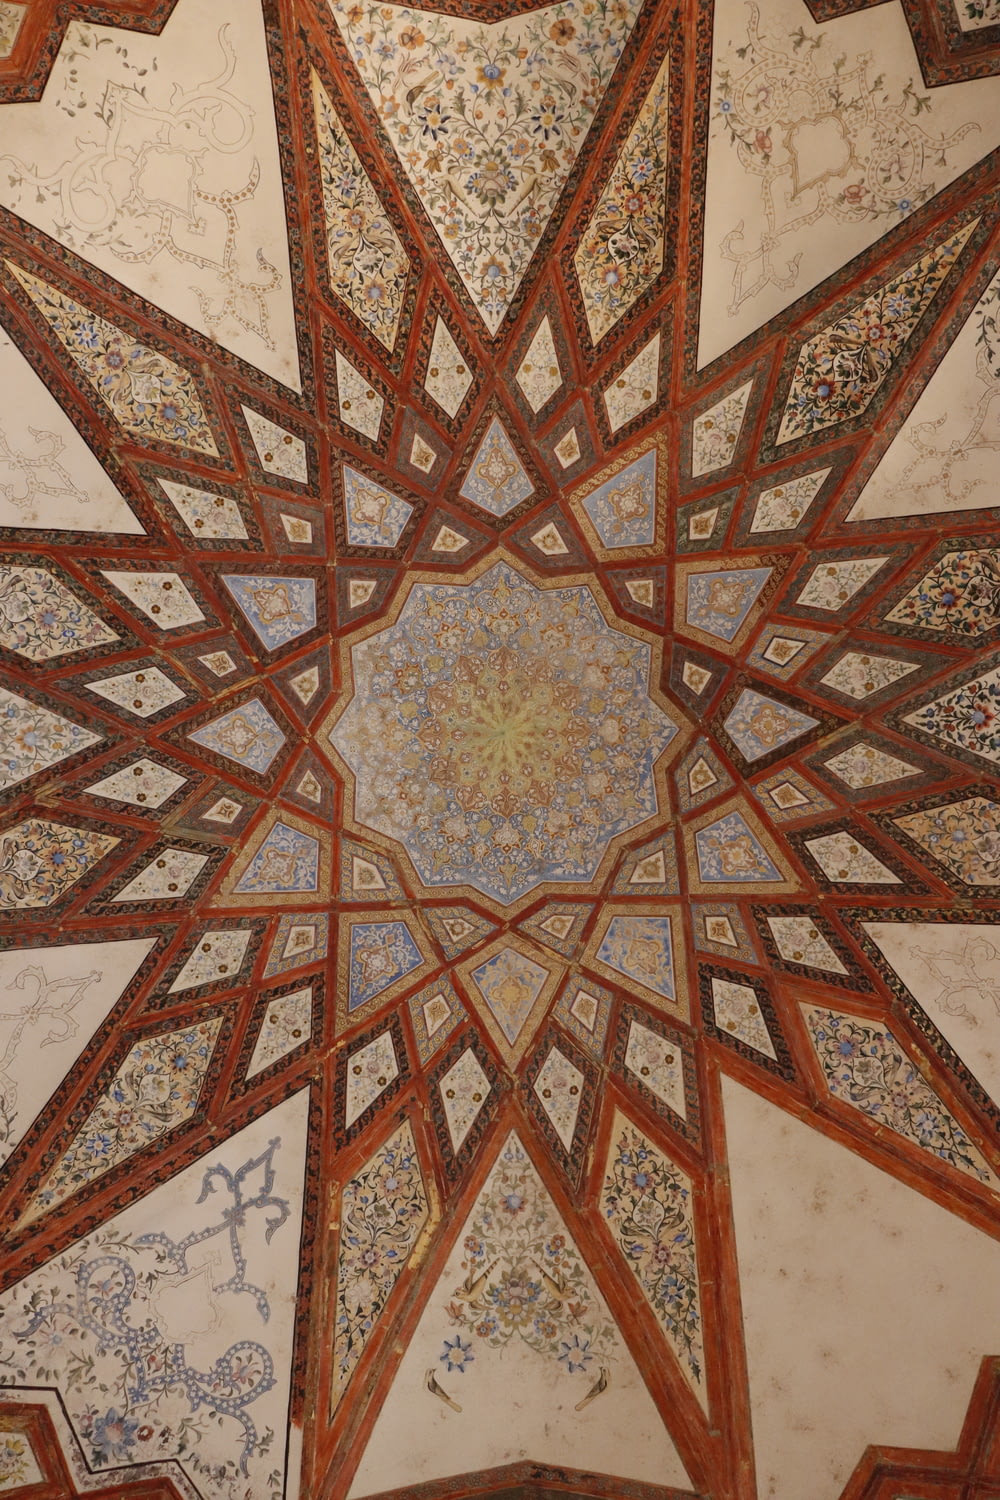 the ceiling of a building with intricate designs